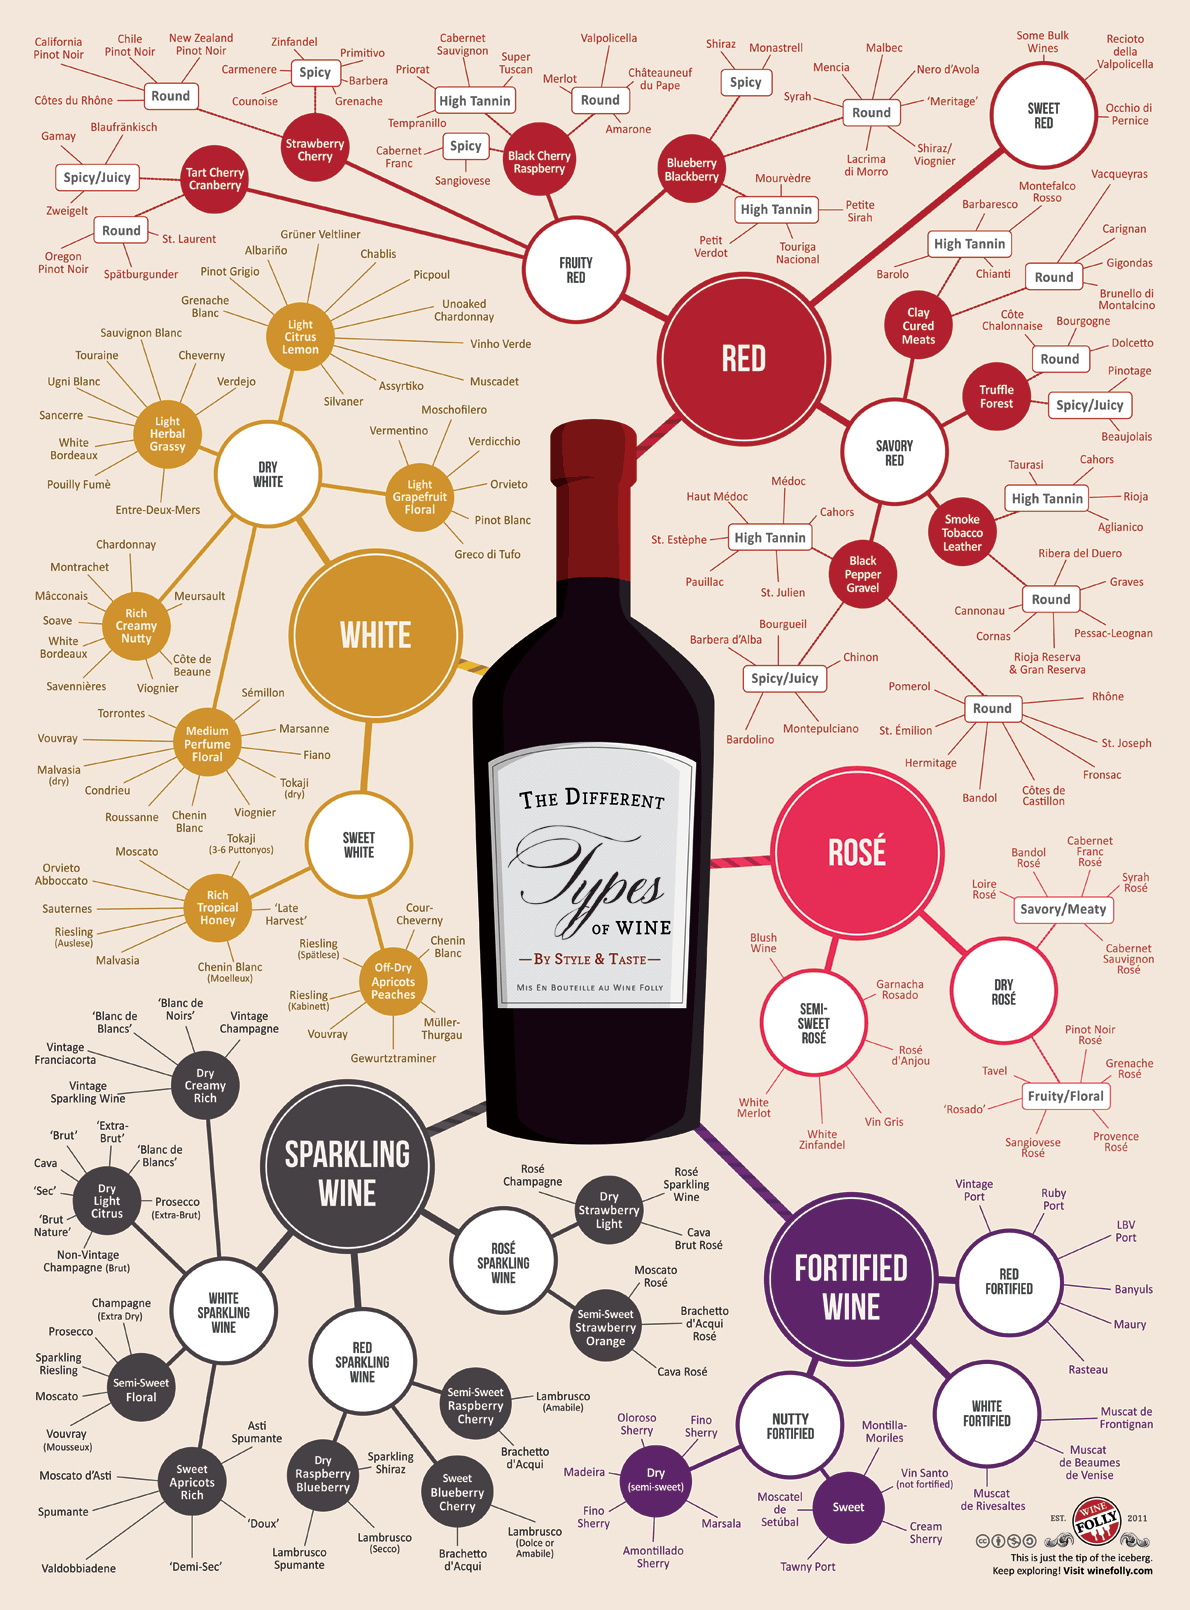 Ordering Wine: Know what you like?